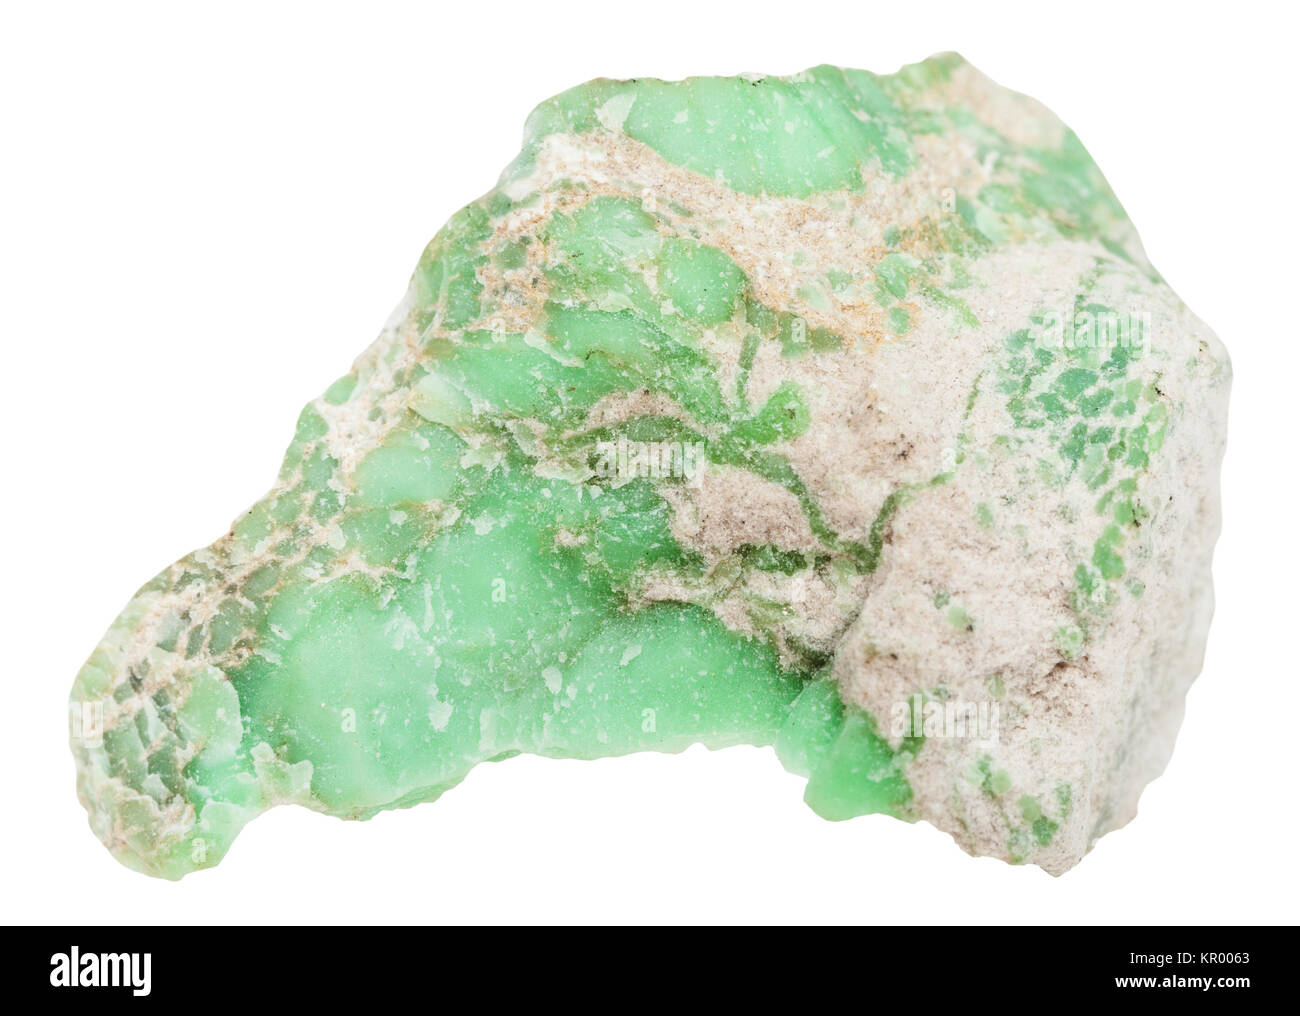 raw Variscite mineral gem stone isolated Stock Photo